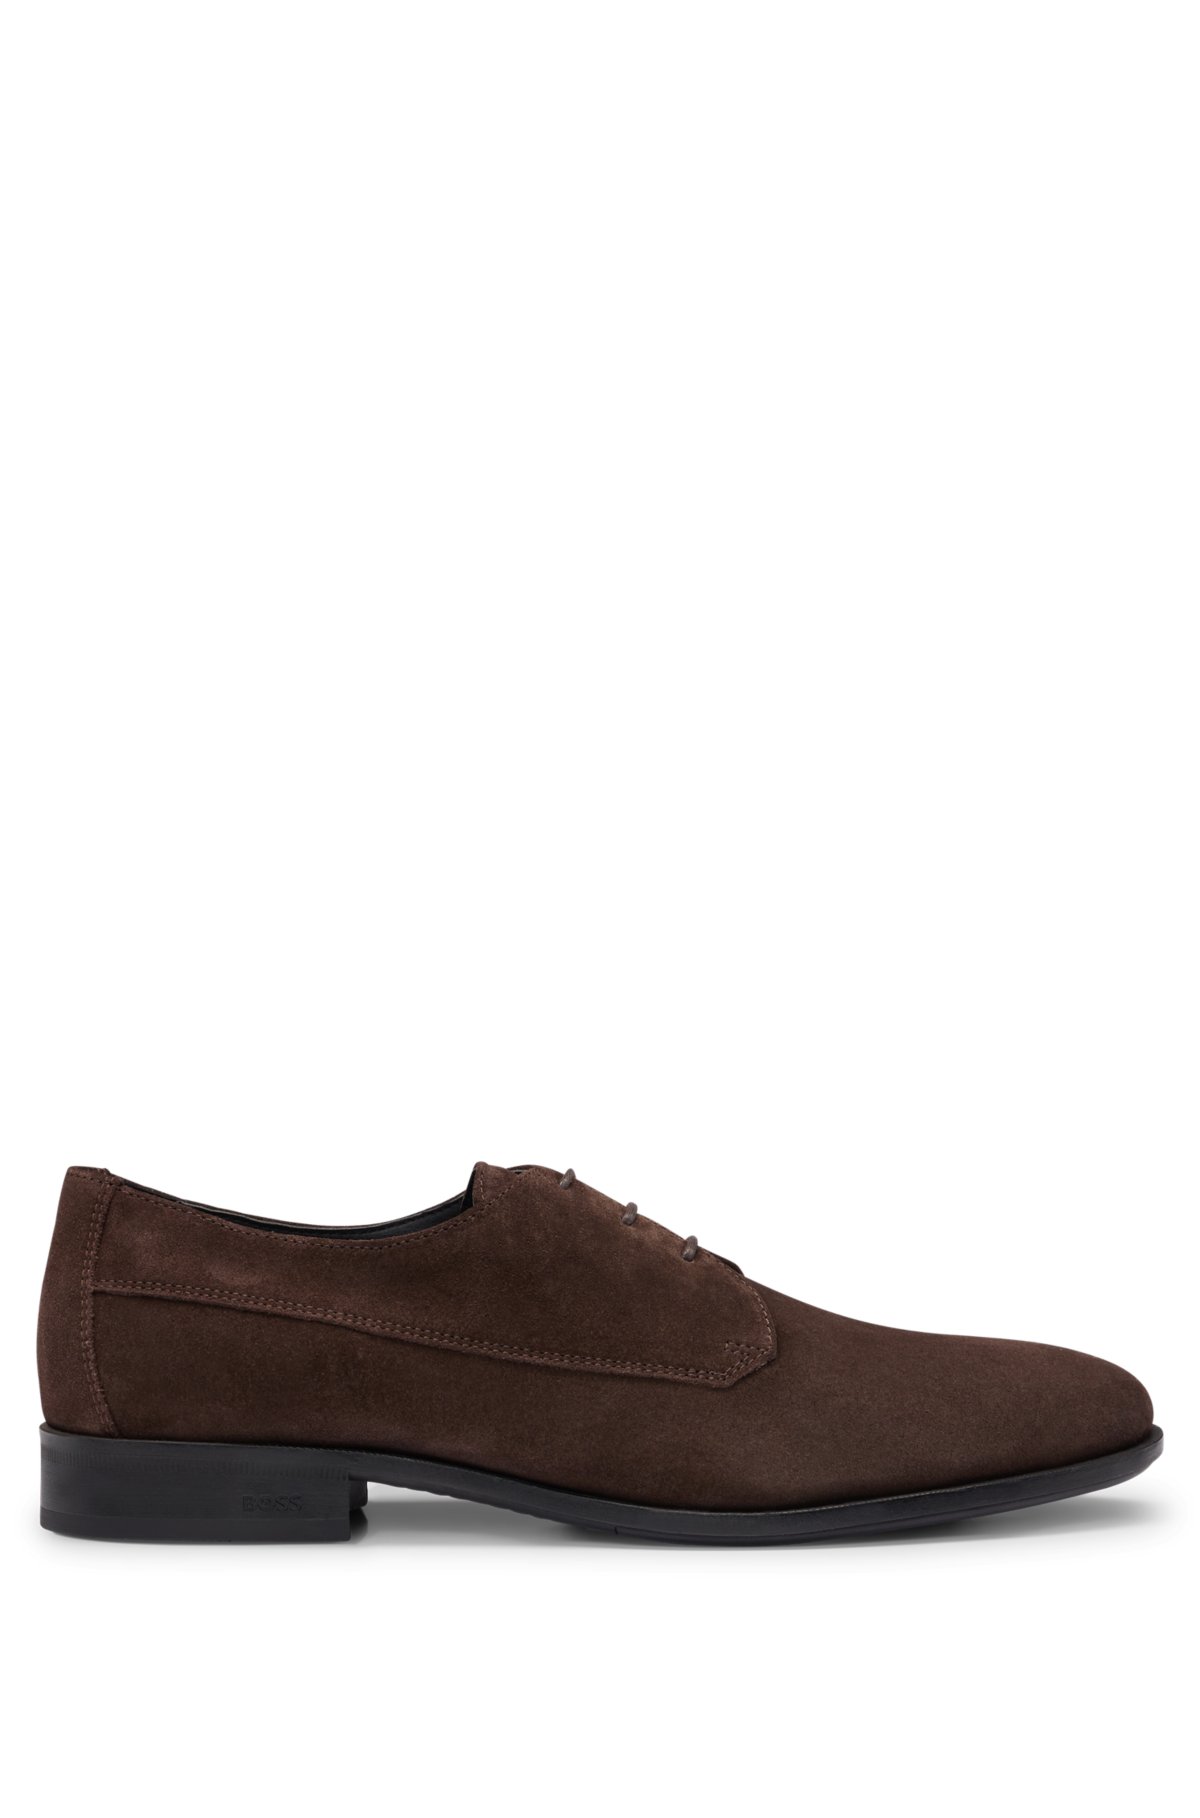 Suede Derby shoes with removable padded insole, Dark Brown